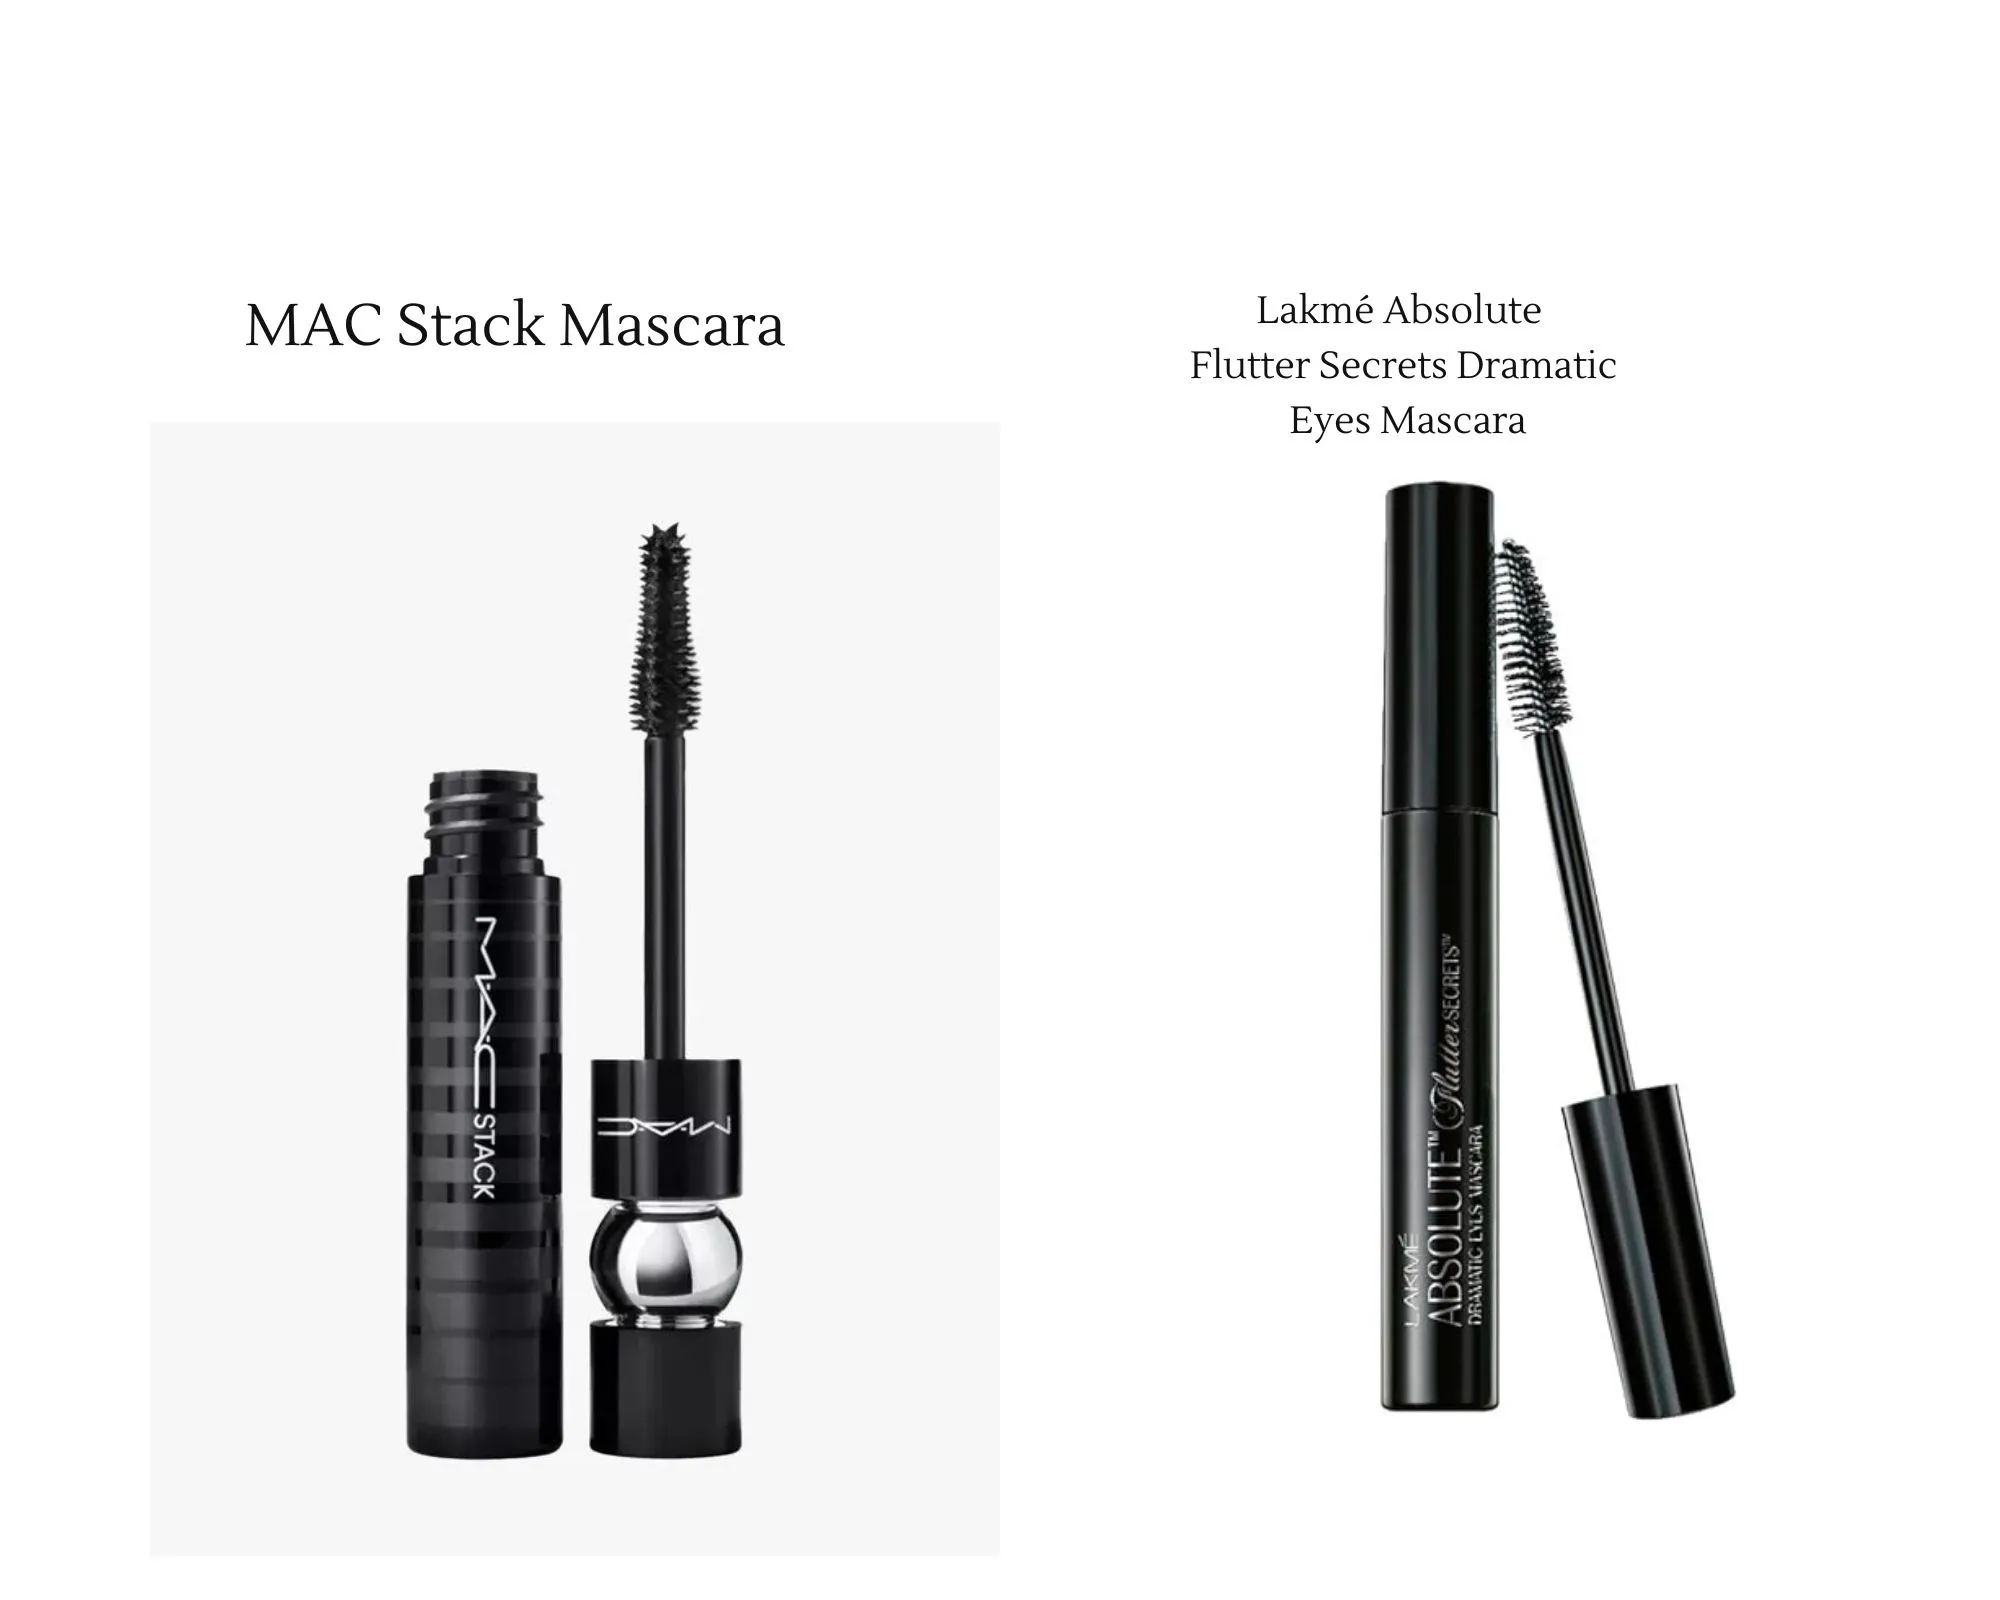 Use a natural-looking mascara with a feathery finish to highlight your eyes without making it look dramatic.